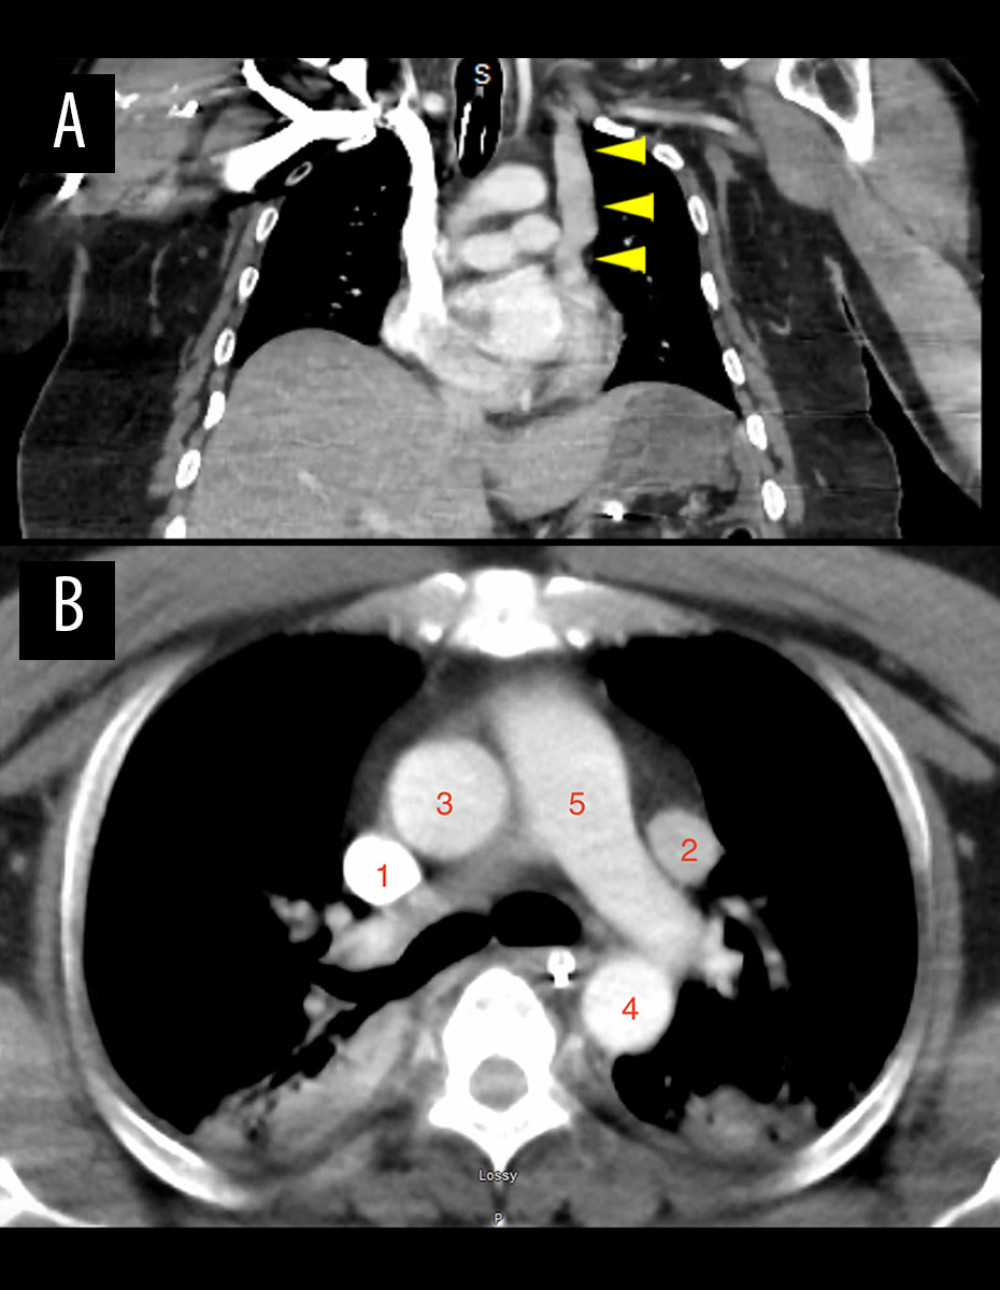 Chest computed tomography. Coronal chest computed tomography with intravenous contrast (A) showing a left-sided superior vena cava draining from the left subclavian vein into the coronary sinus. Axial chest computed tomography with intravenous contrast (B) demonstrating the right superior vena cava (1), left persistent superior vena cava (2), ascending aorta (3), descending aorta (4), and pulmonary trunk (5).